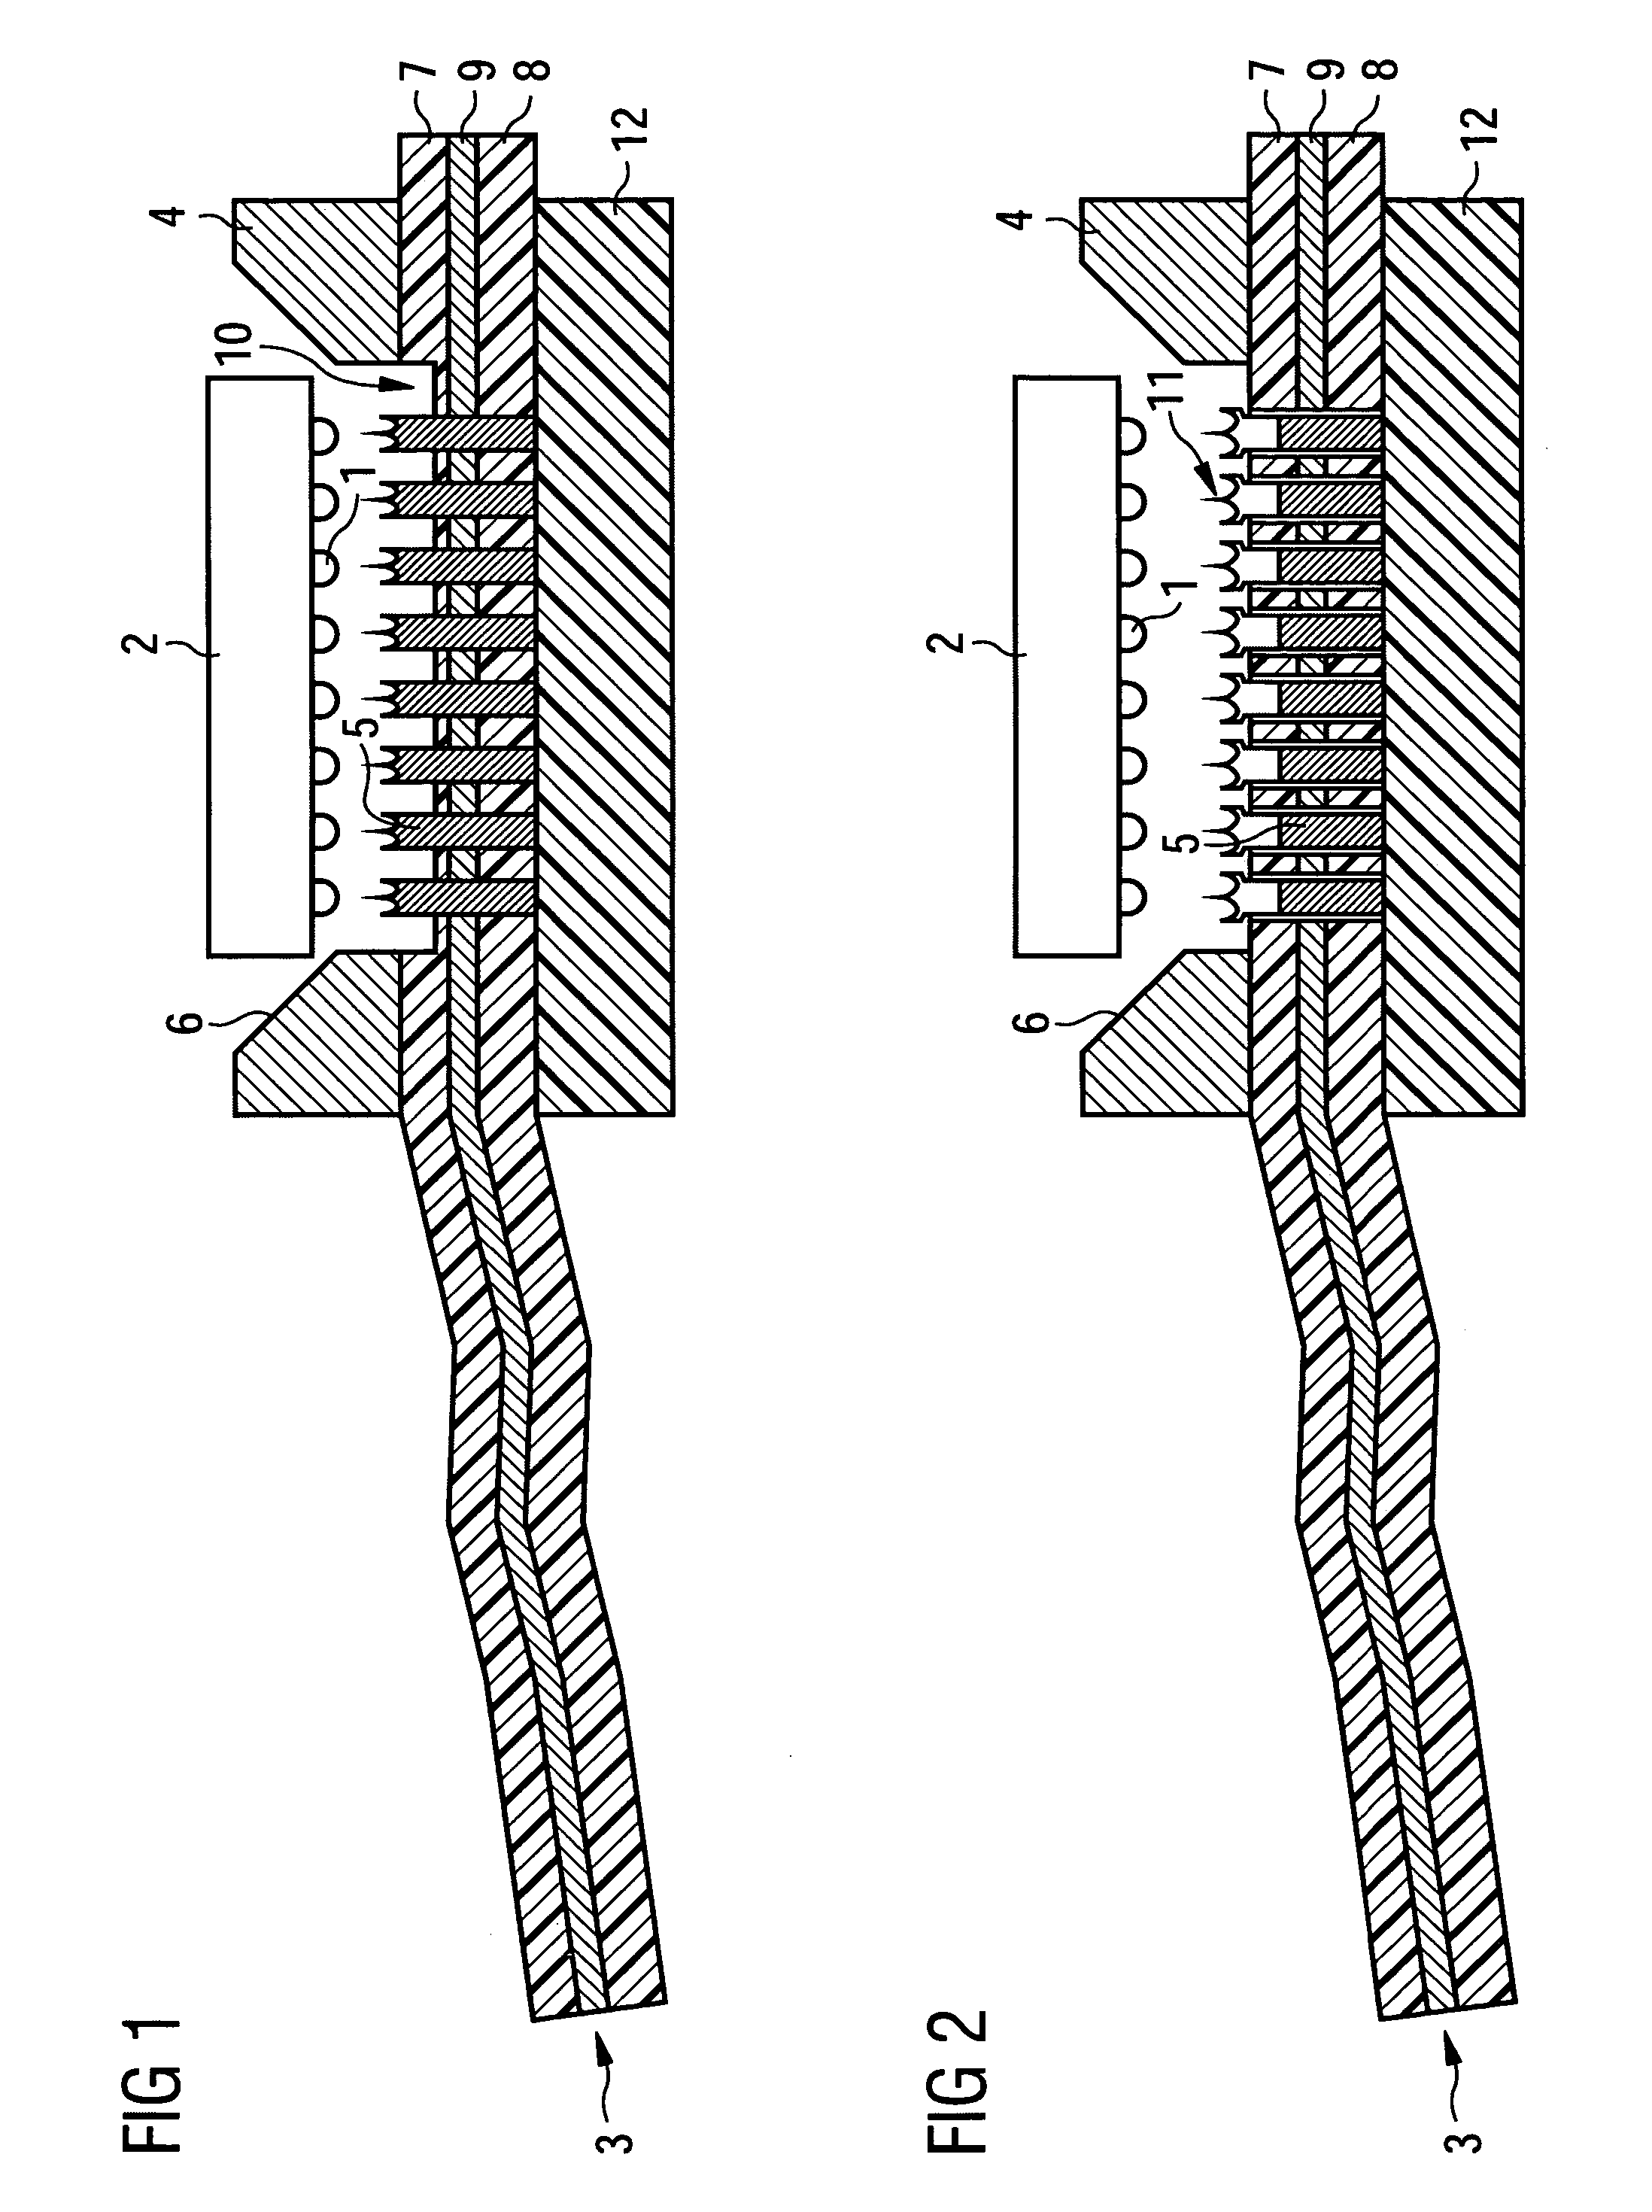 Arrangement for producing an electrical connection between a BGA package and a signal source, and method for producing such a connection